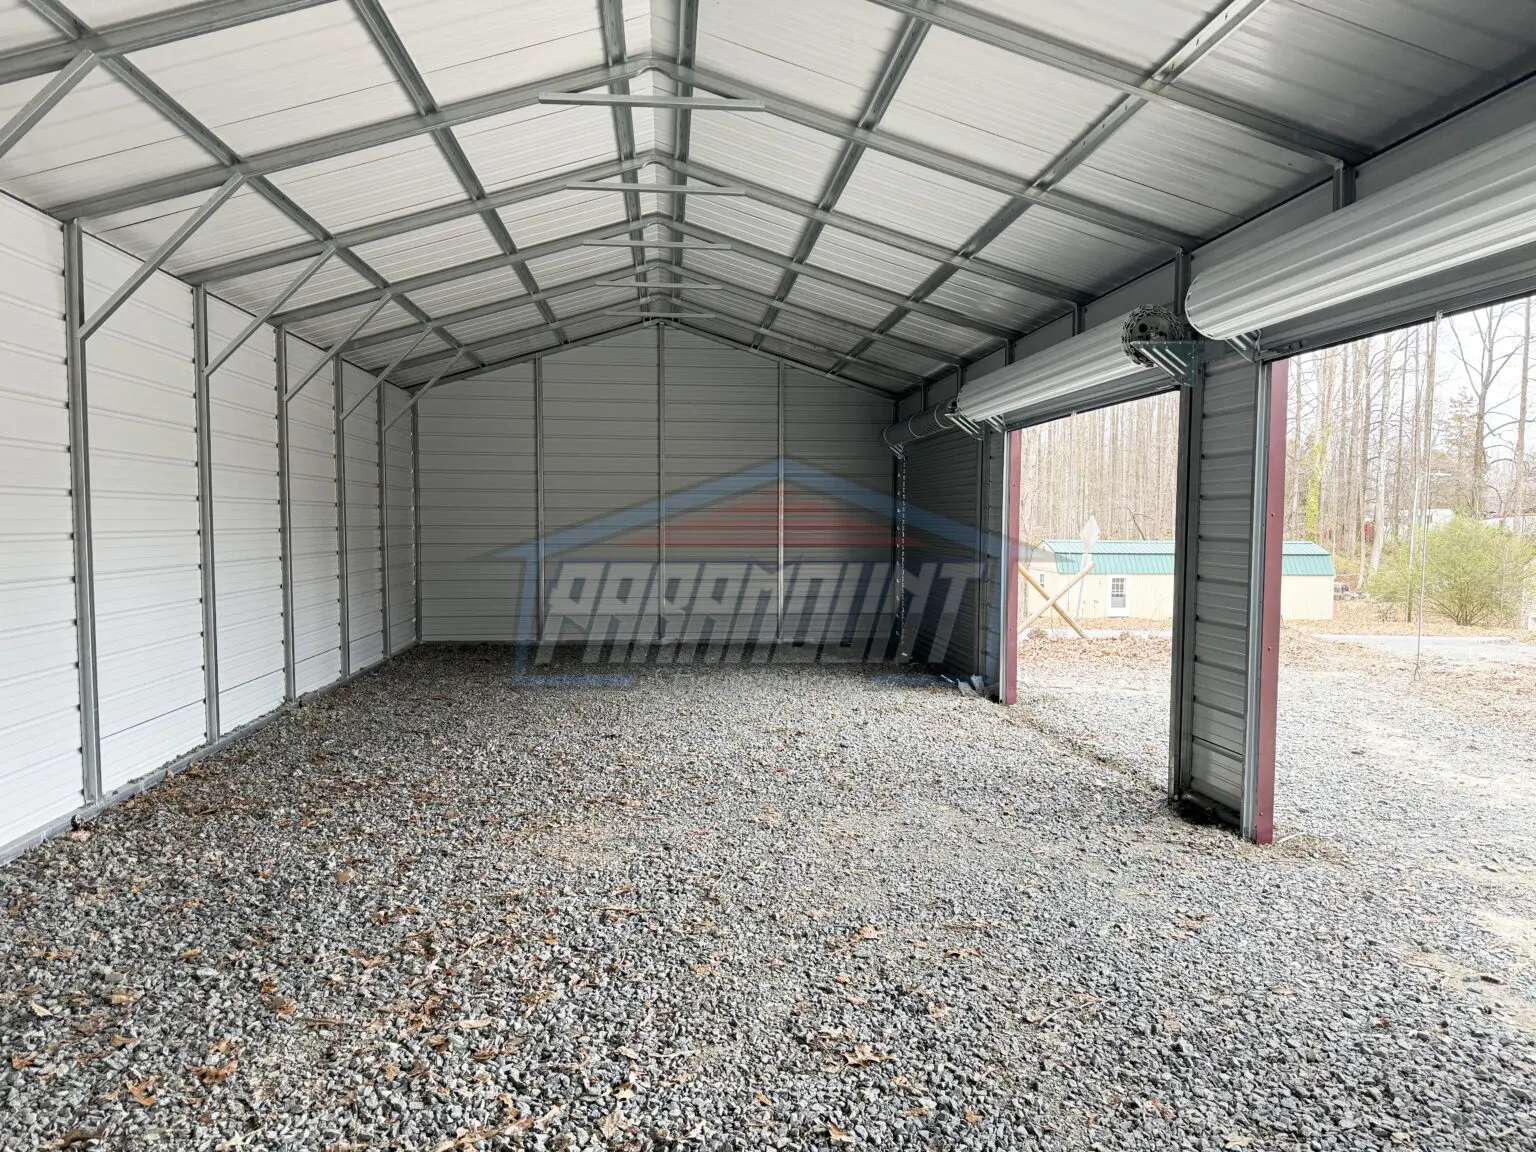 A metal building with two garage doors and a gravel floor.